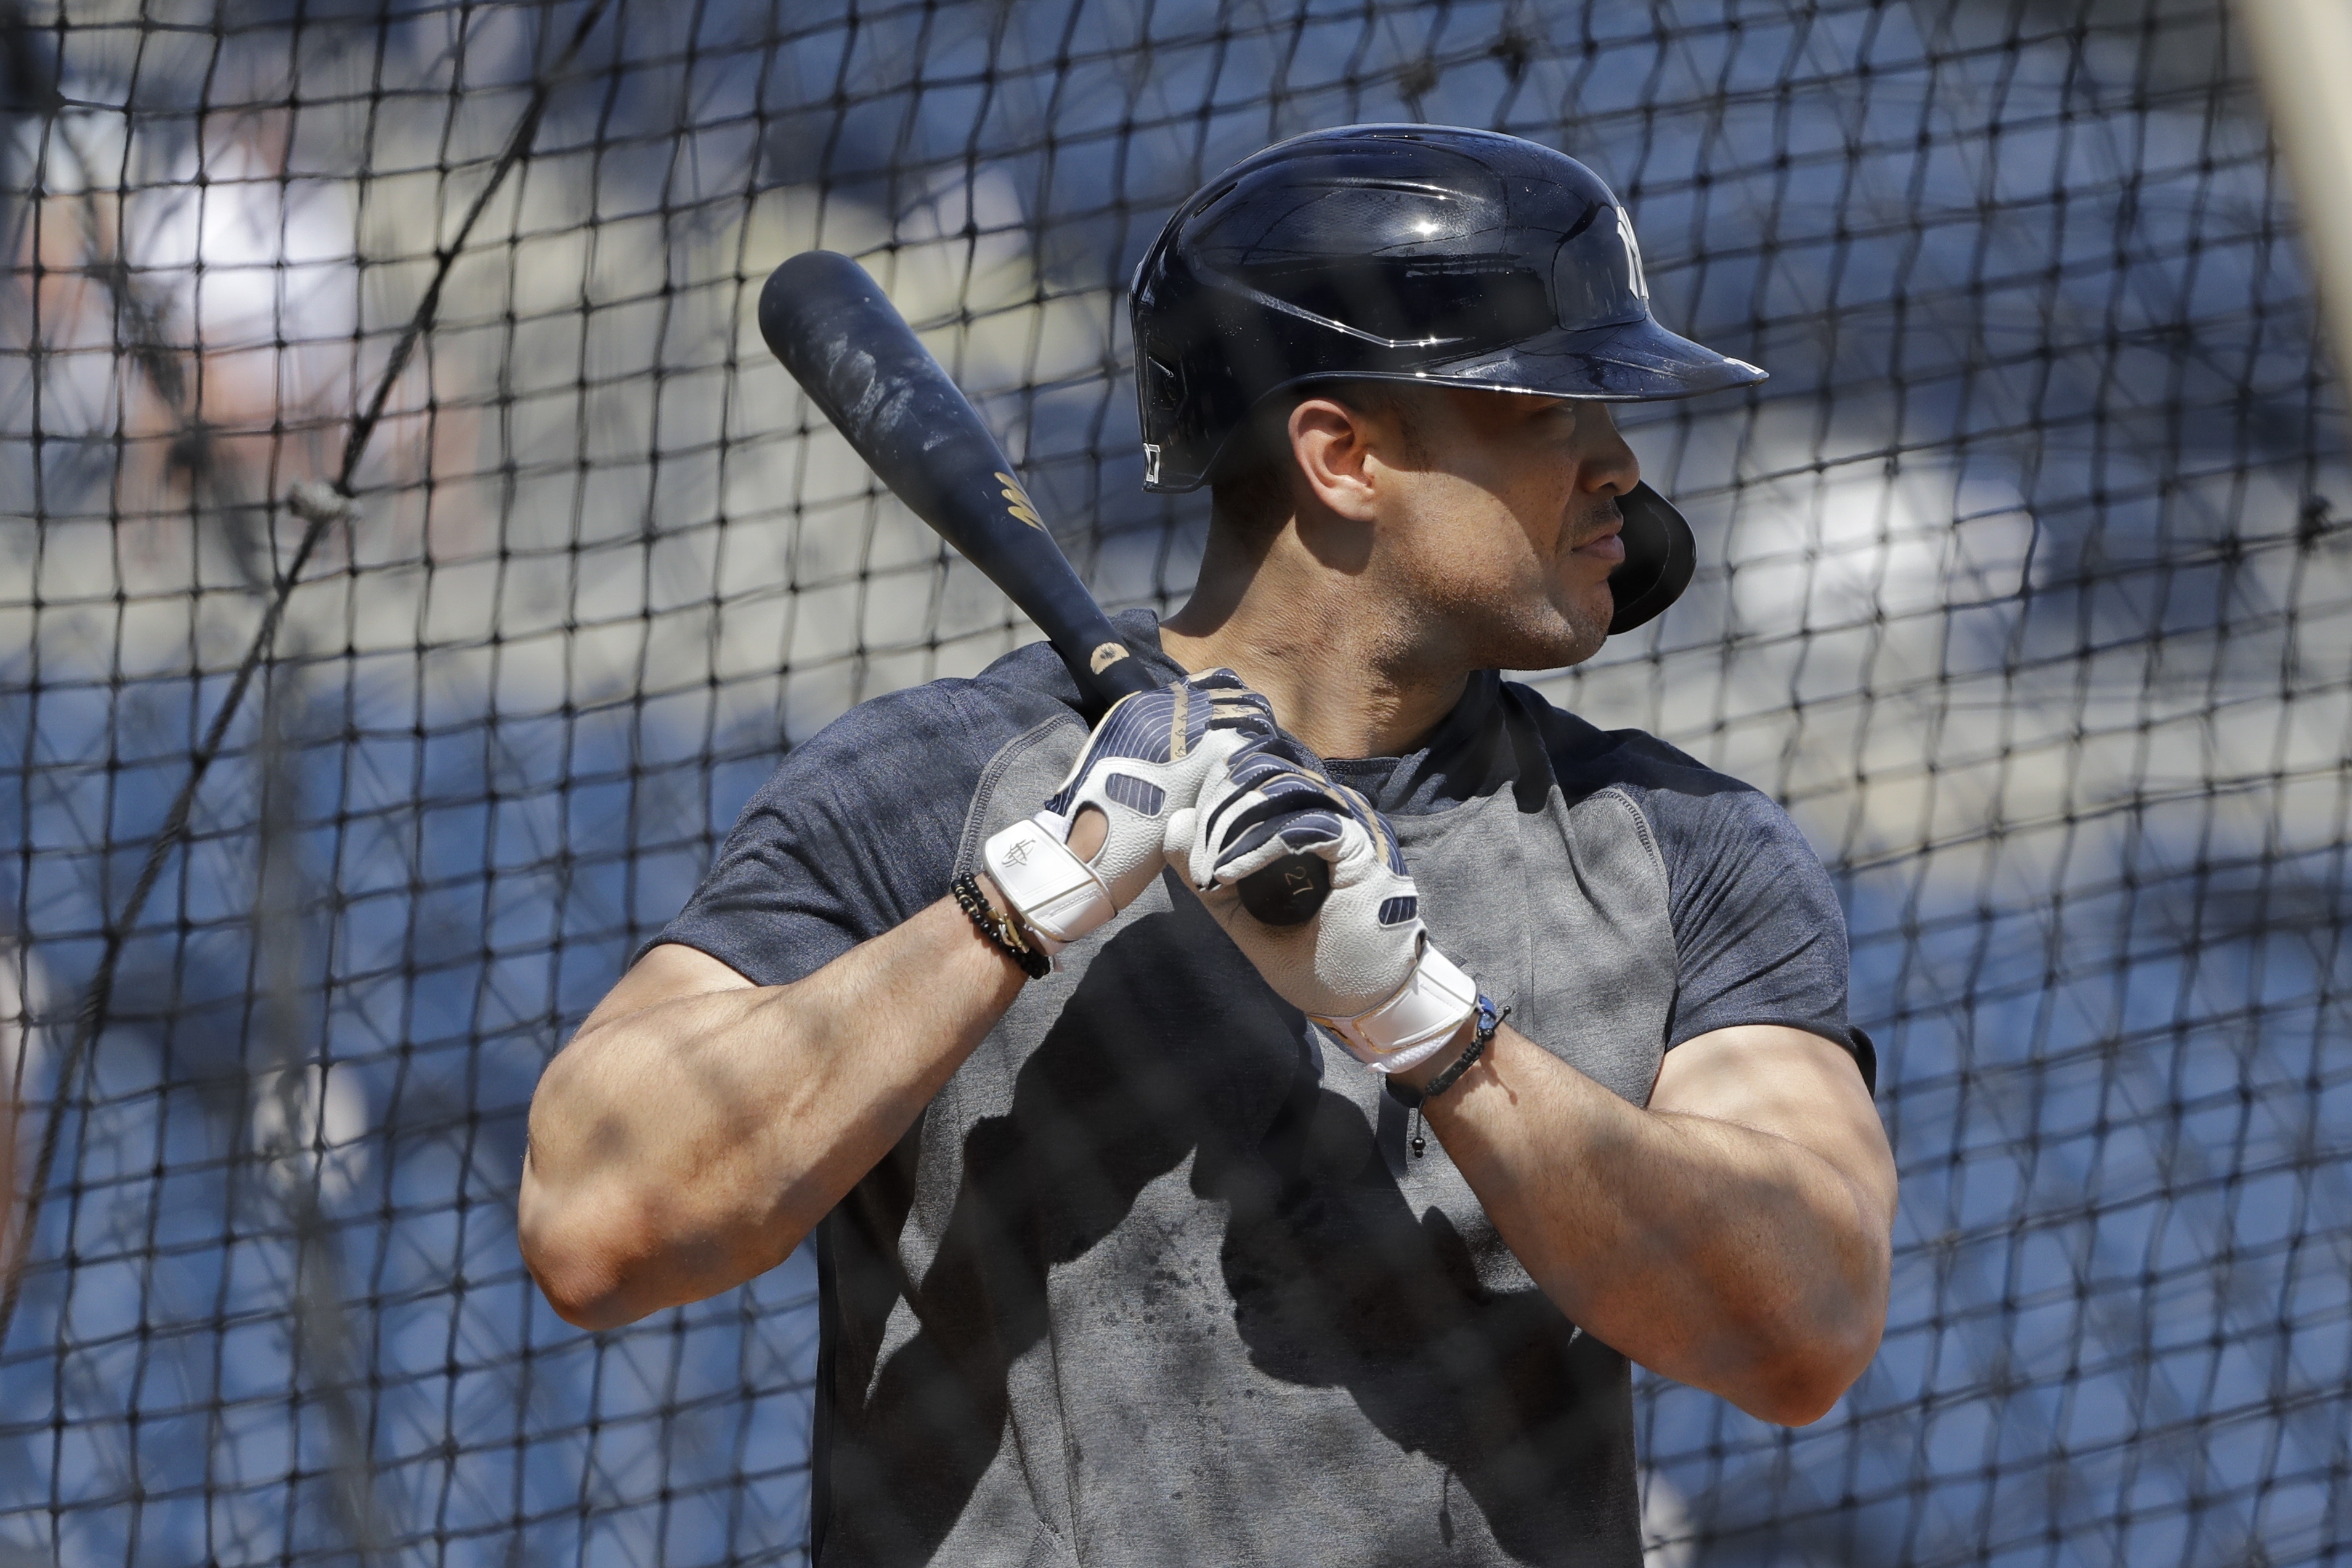 New York Yankees DH Giancarlo Stanton Is Only Hitting Home Runs